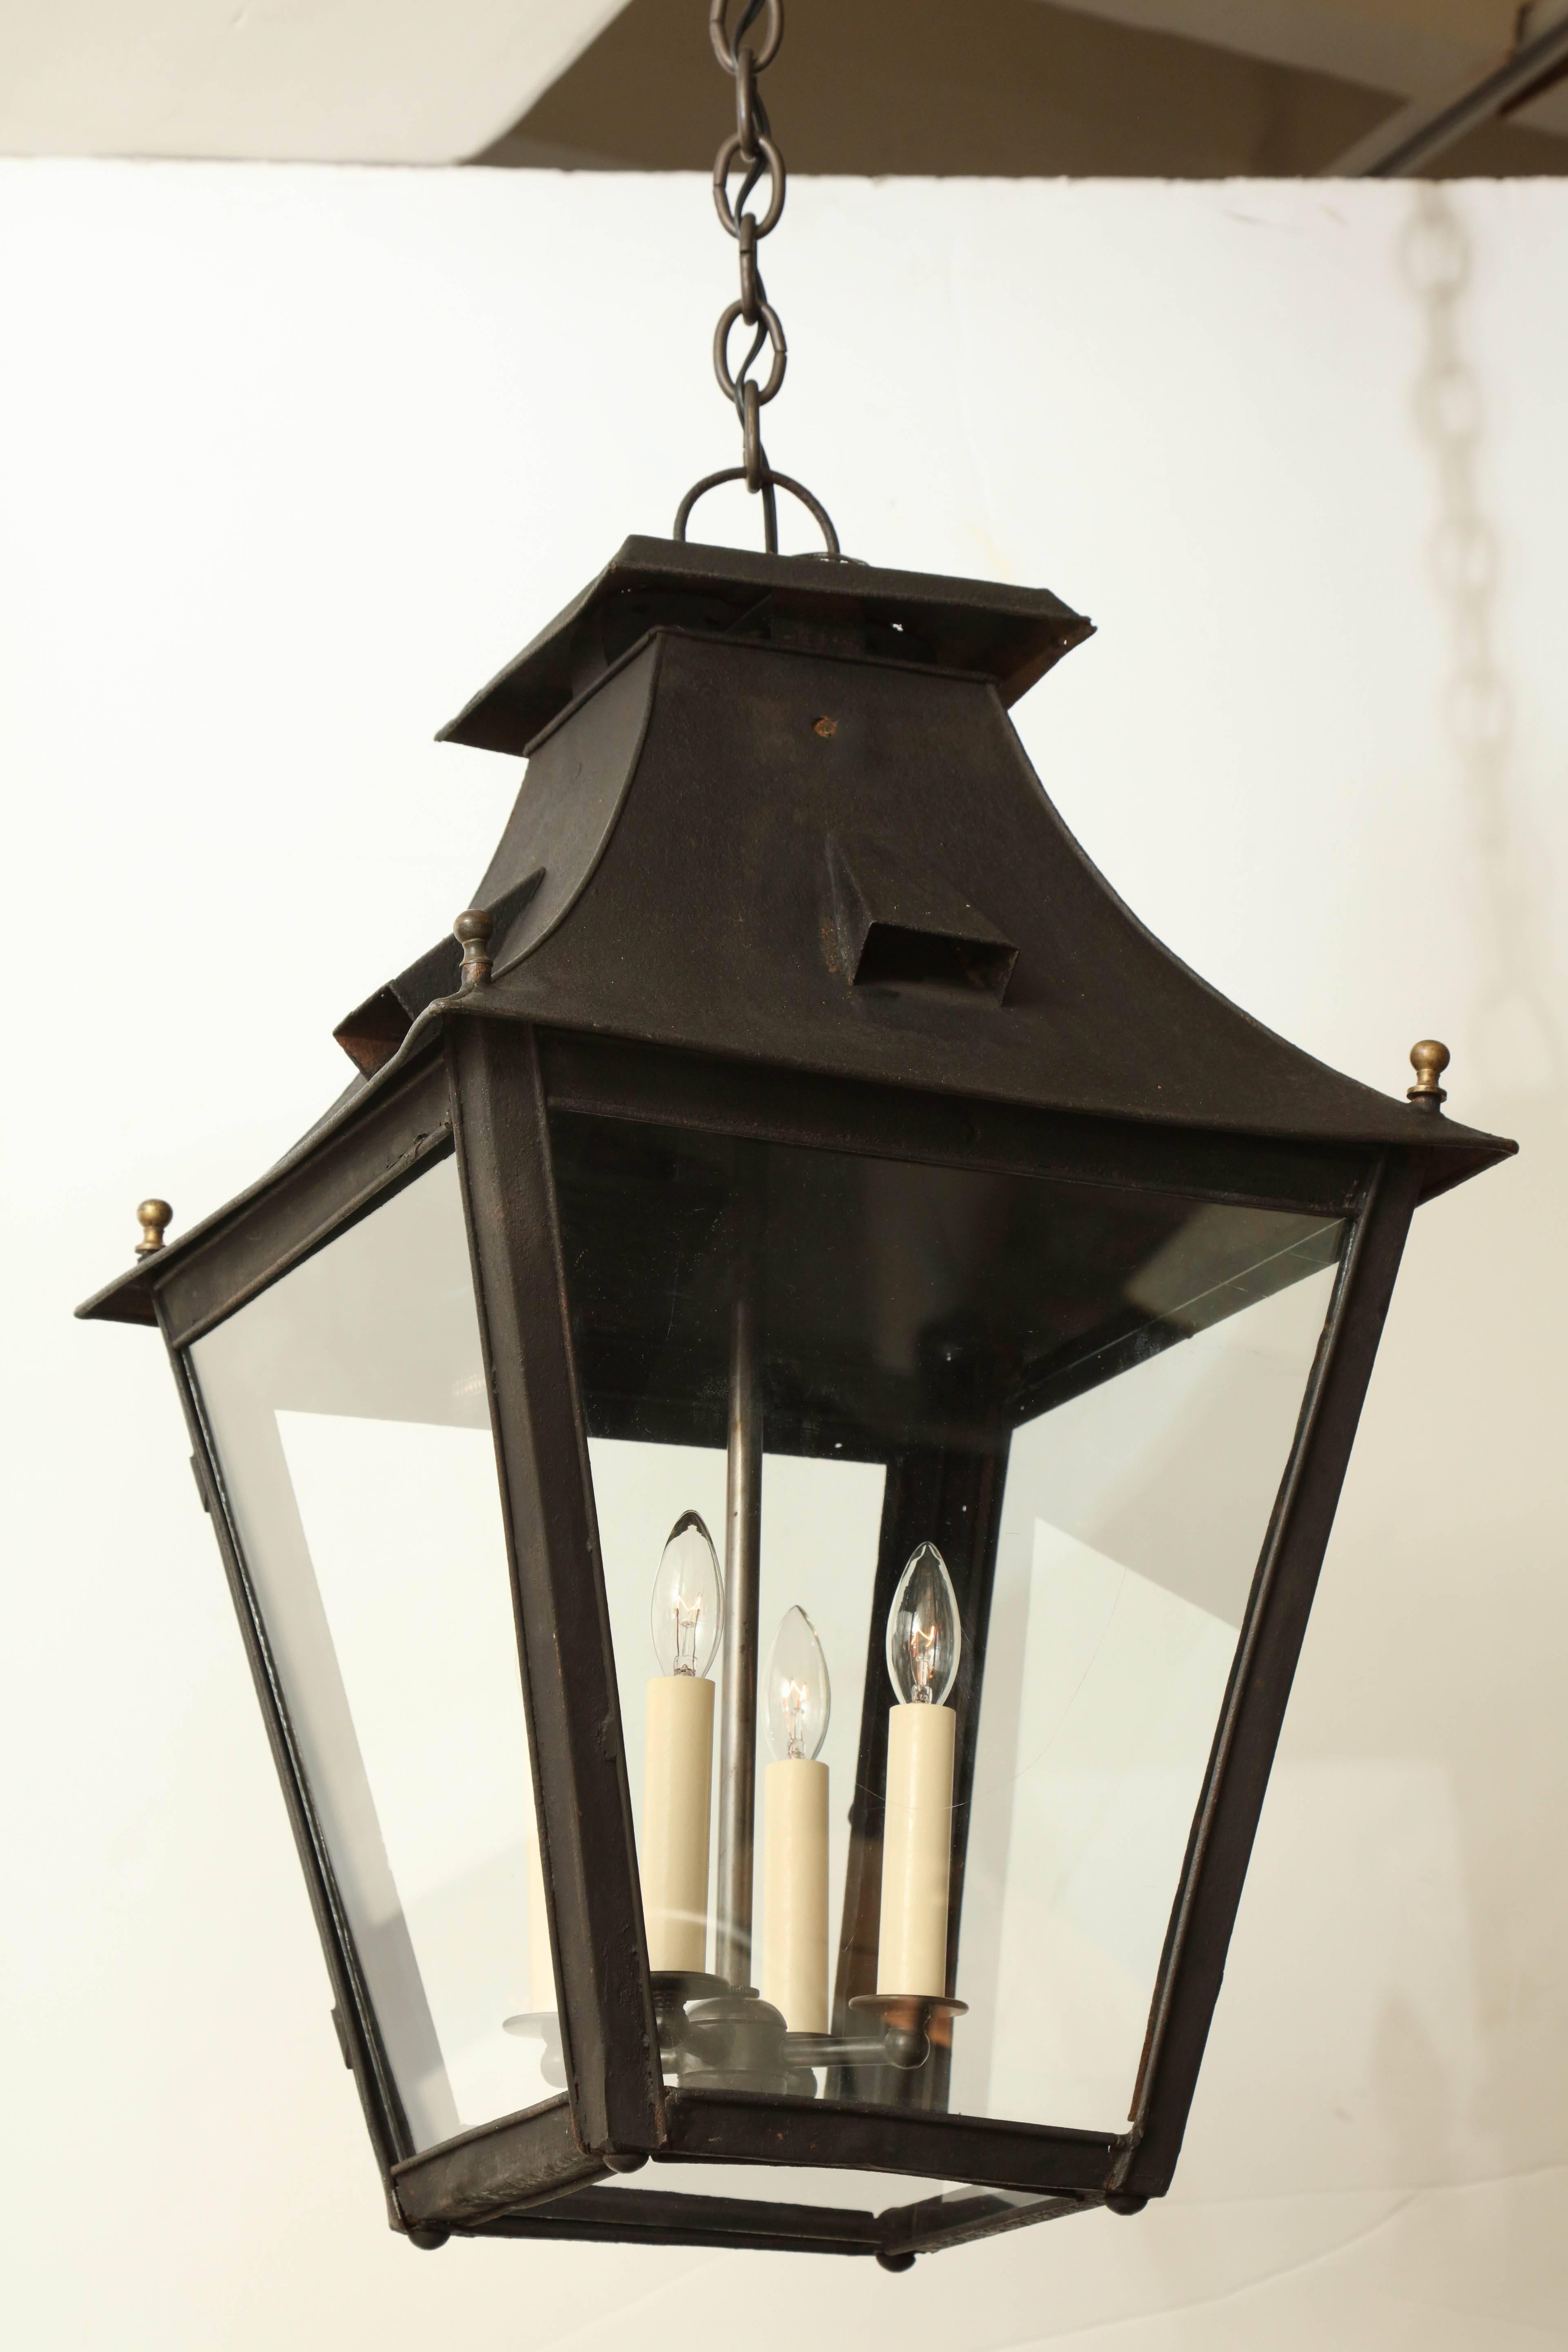 A large, 19th century painted metal lantern made in Italy. Square shape lantern with four candelabra lights. Recently rewired for US specifications, it is not UL listed.
Overall dimensions:
15.75” W 15.75” D 25” H.